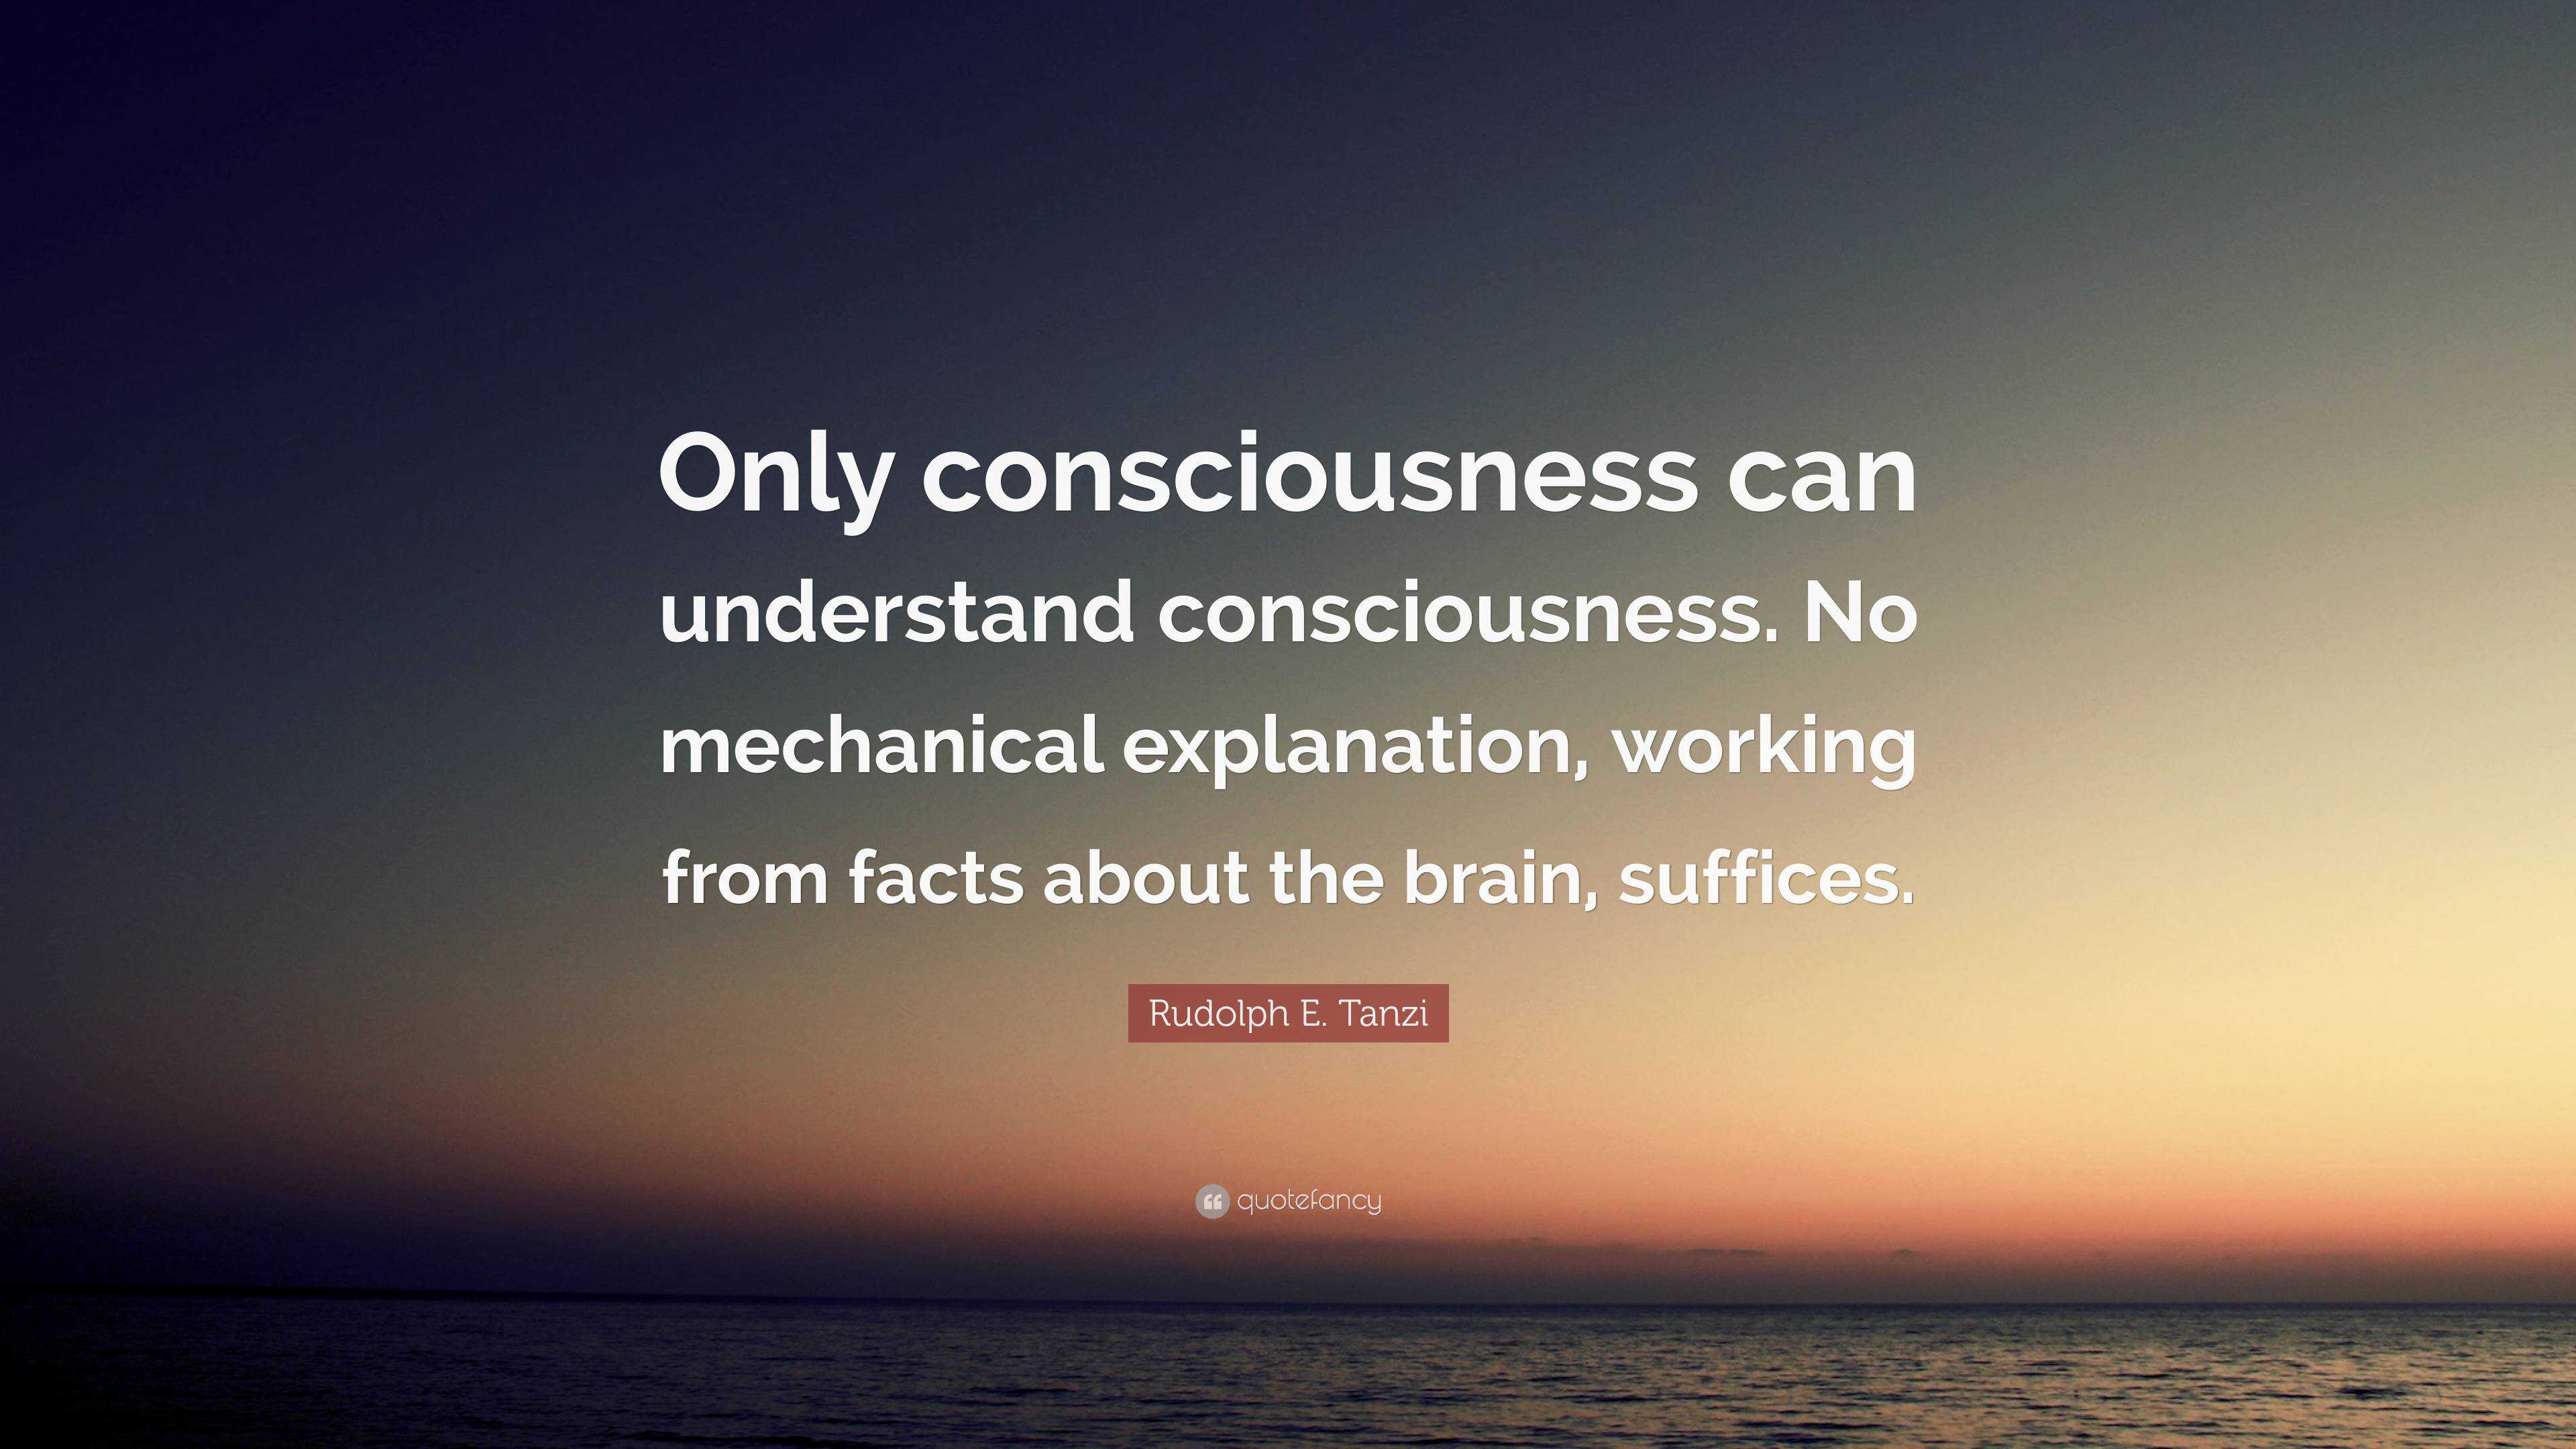 Rudolph E. Tanzi Quote: “Only consciousness can understand ...